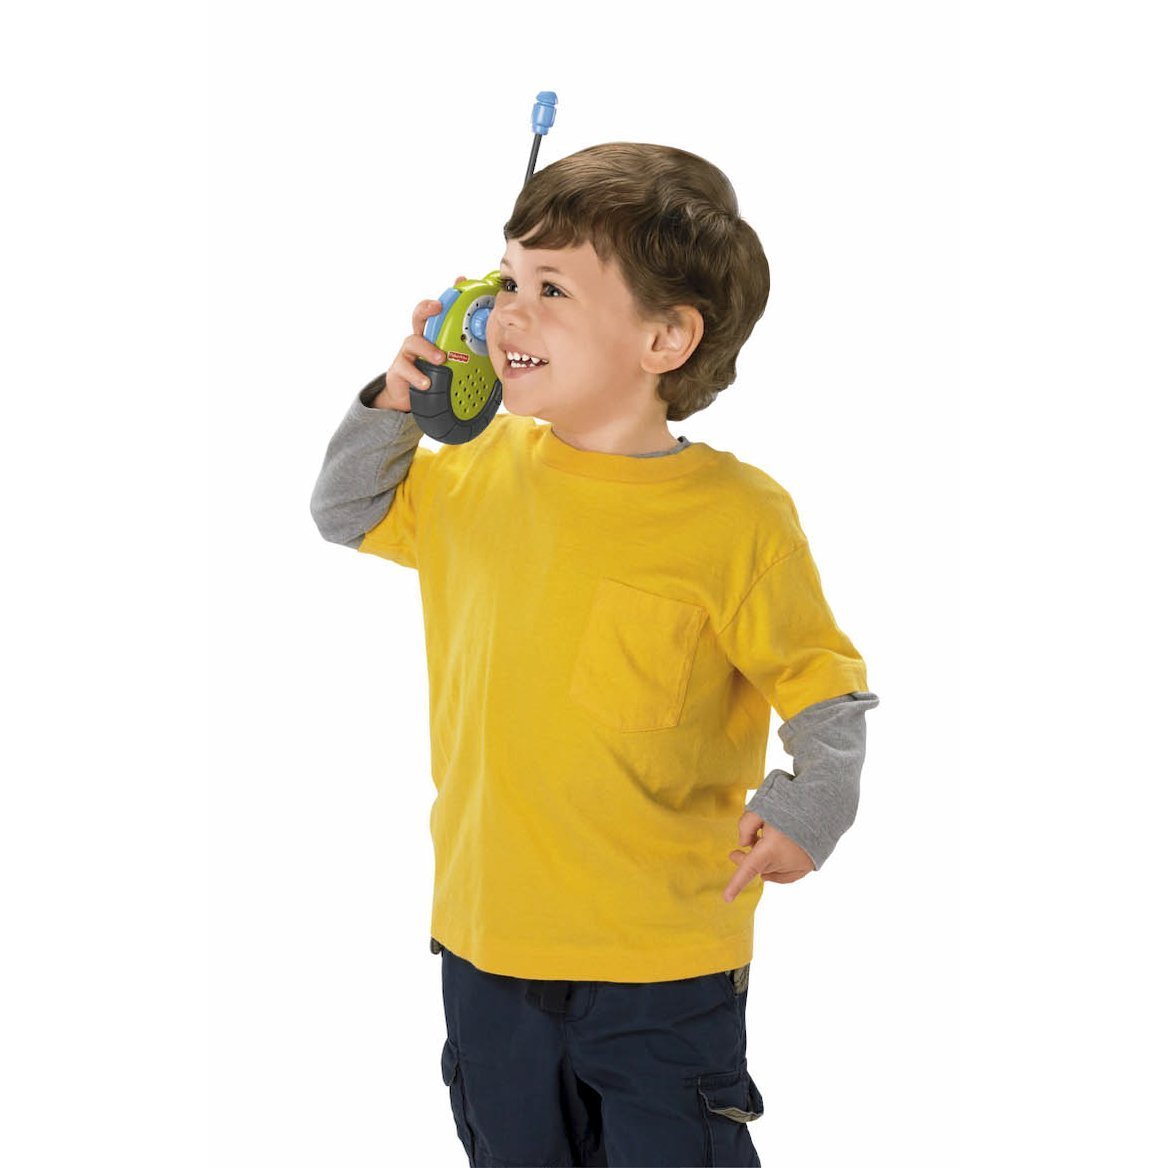 Best walkie talkie for your child